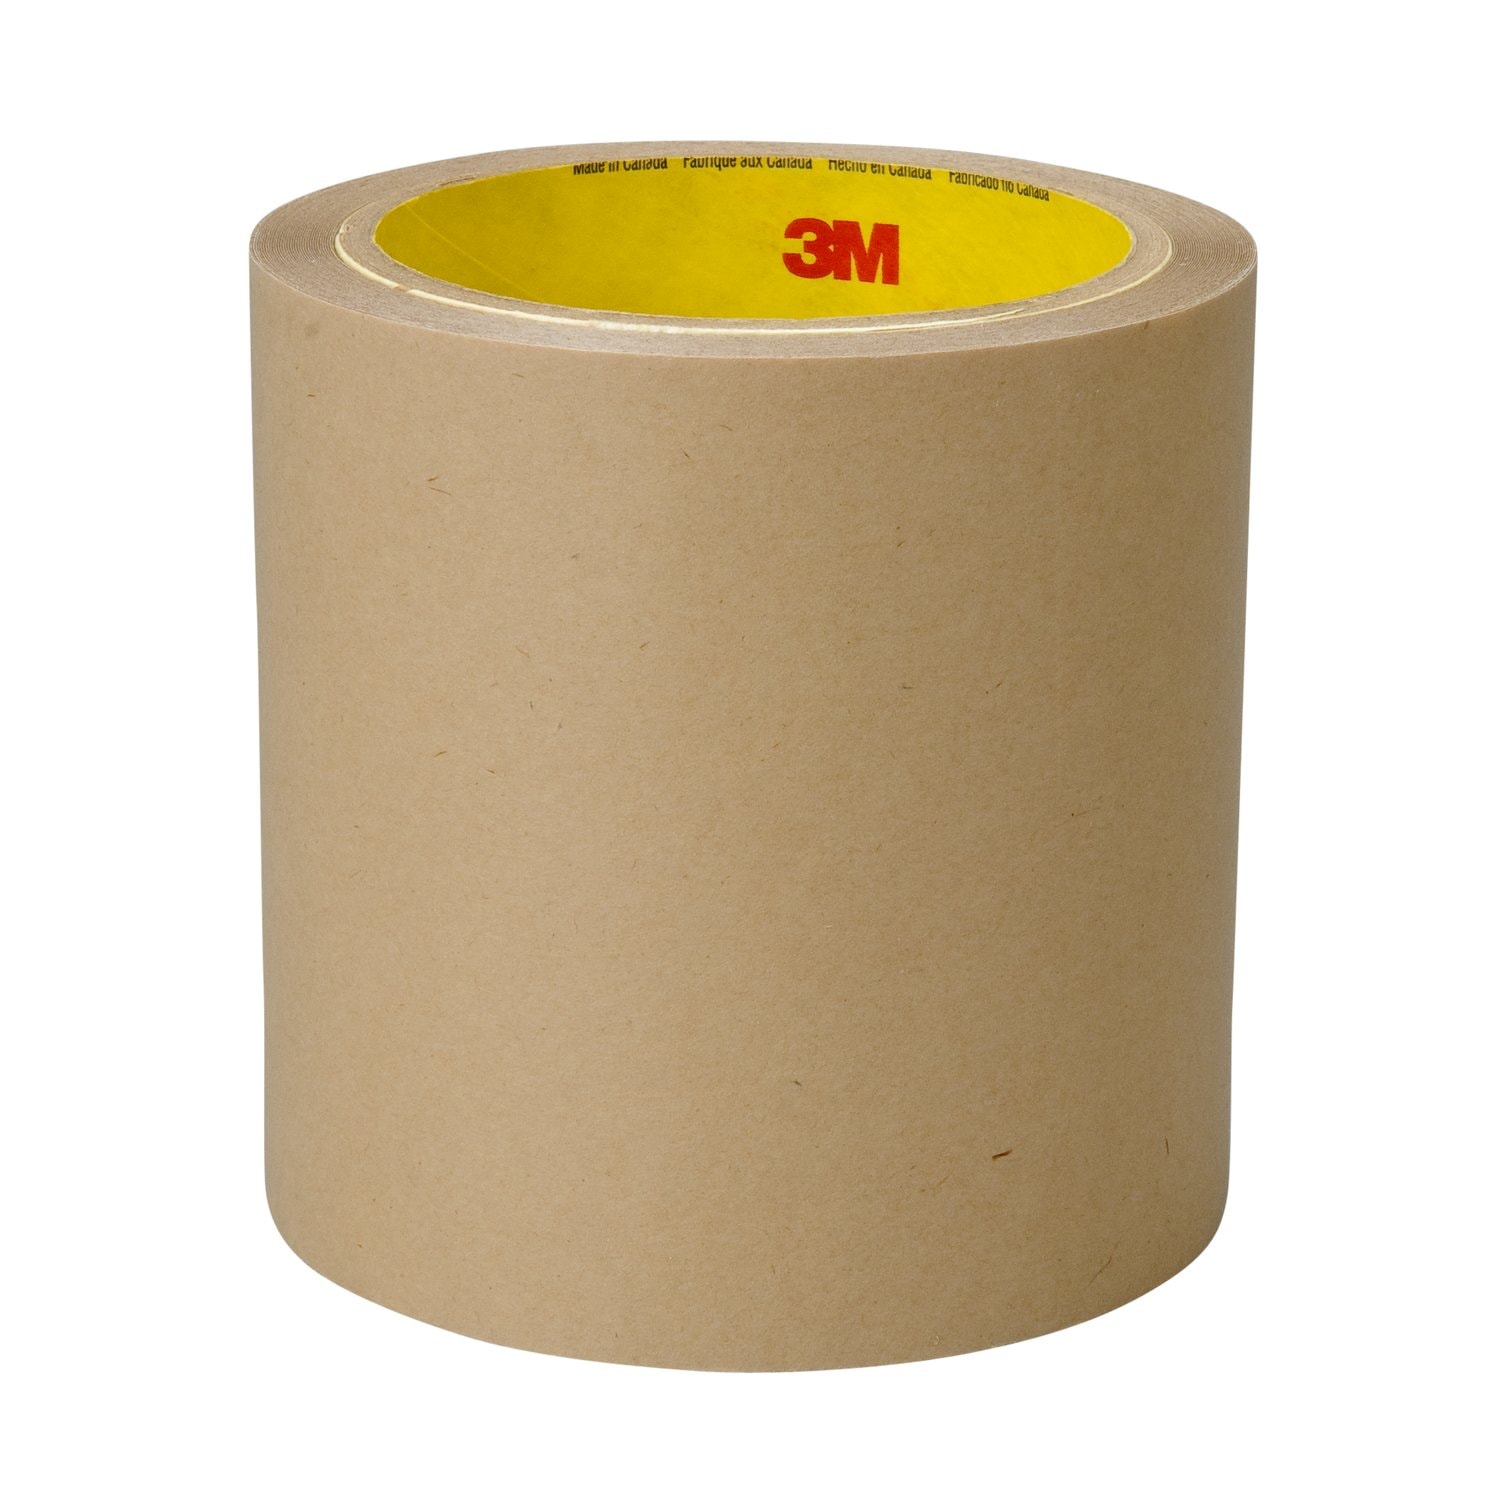 7000123456 - 3M Double Coated Tape 9500PC, Clear, 1 1/2 in x 36 yd, 5.6 mil, 24
rolls per case